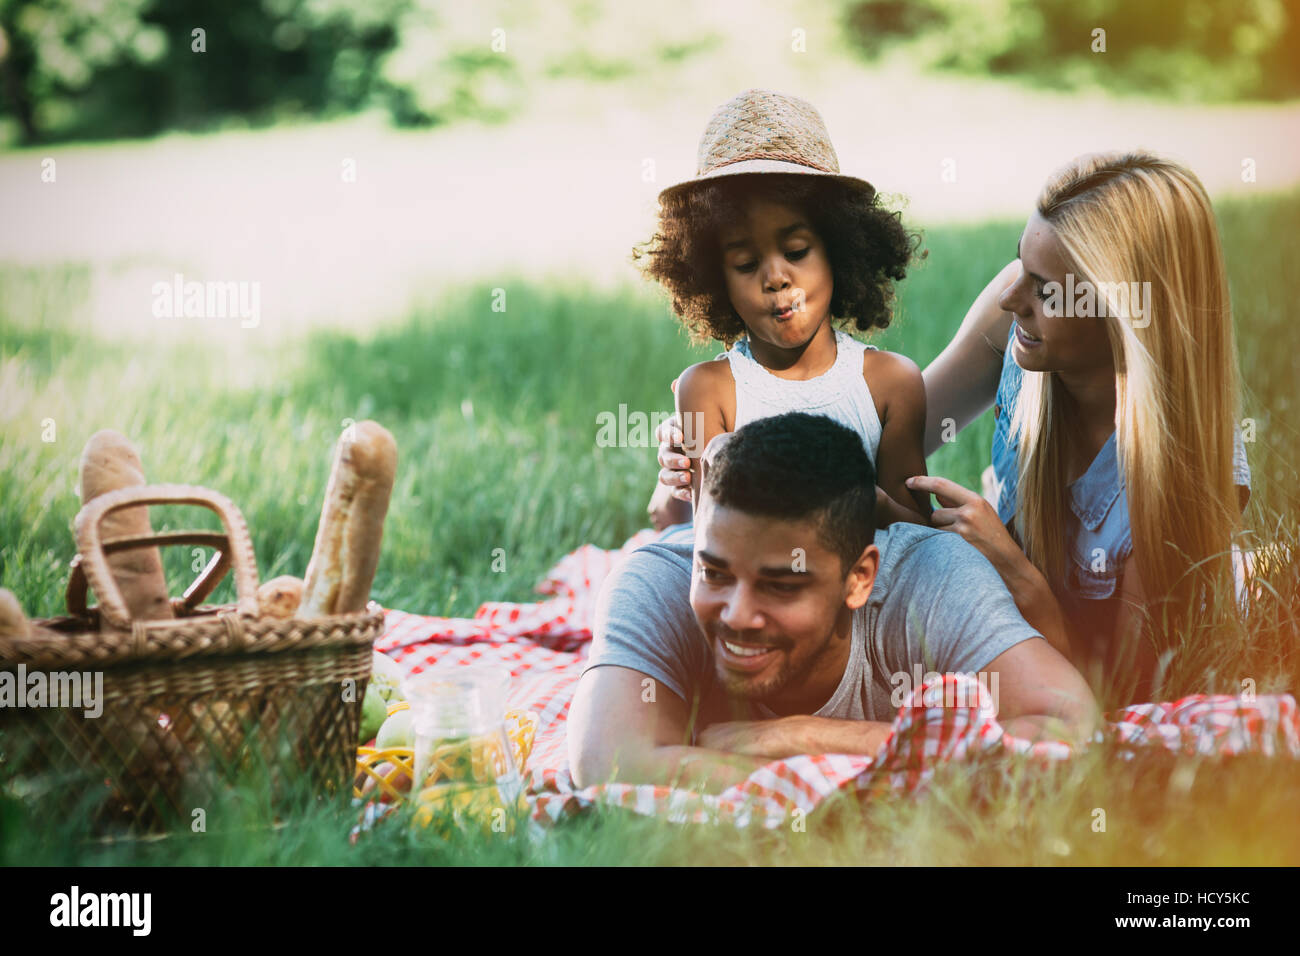 Family having fun and picnic in nature Stock Photo